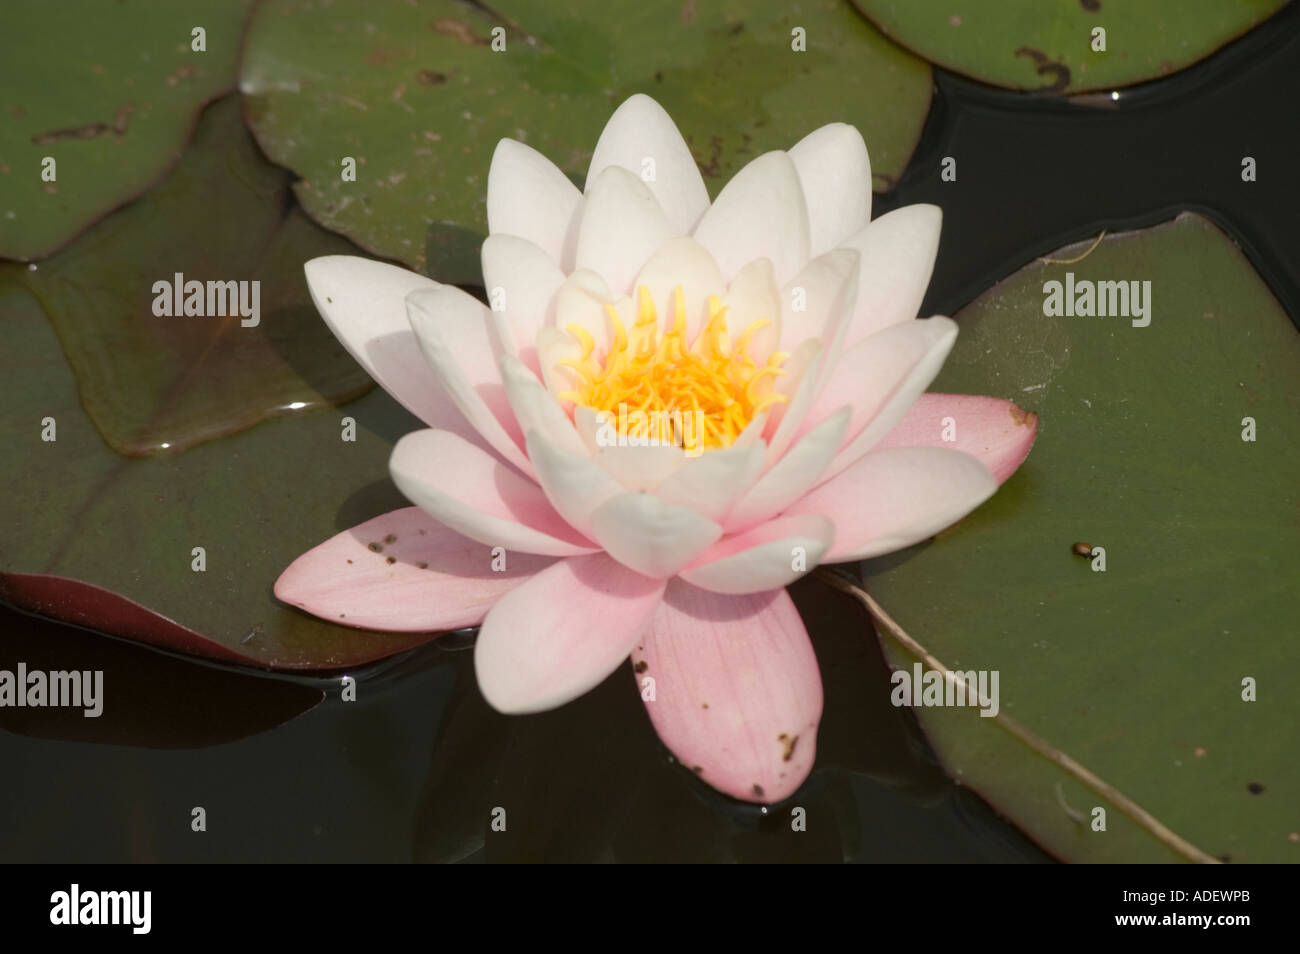 White Pink Water Lily growing in pond LATIN NAME Nymphaea Stock Photo